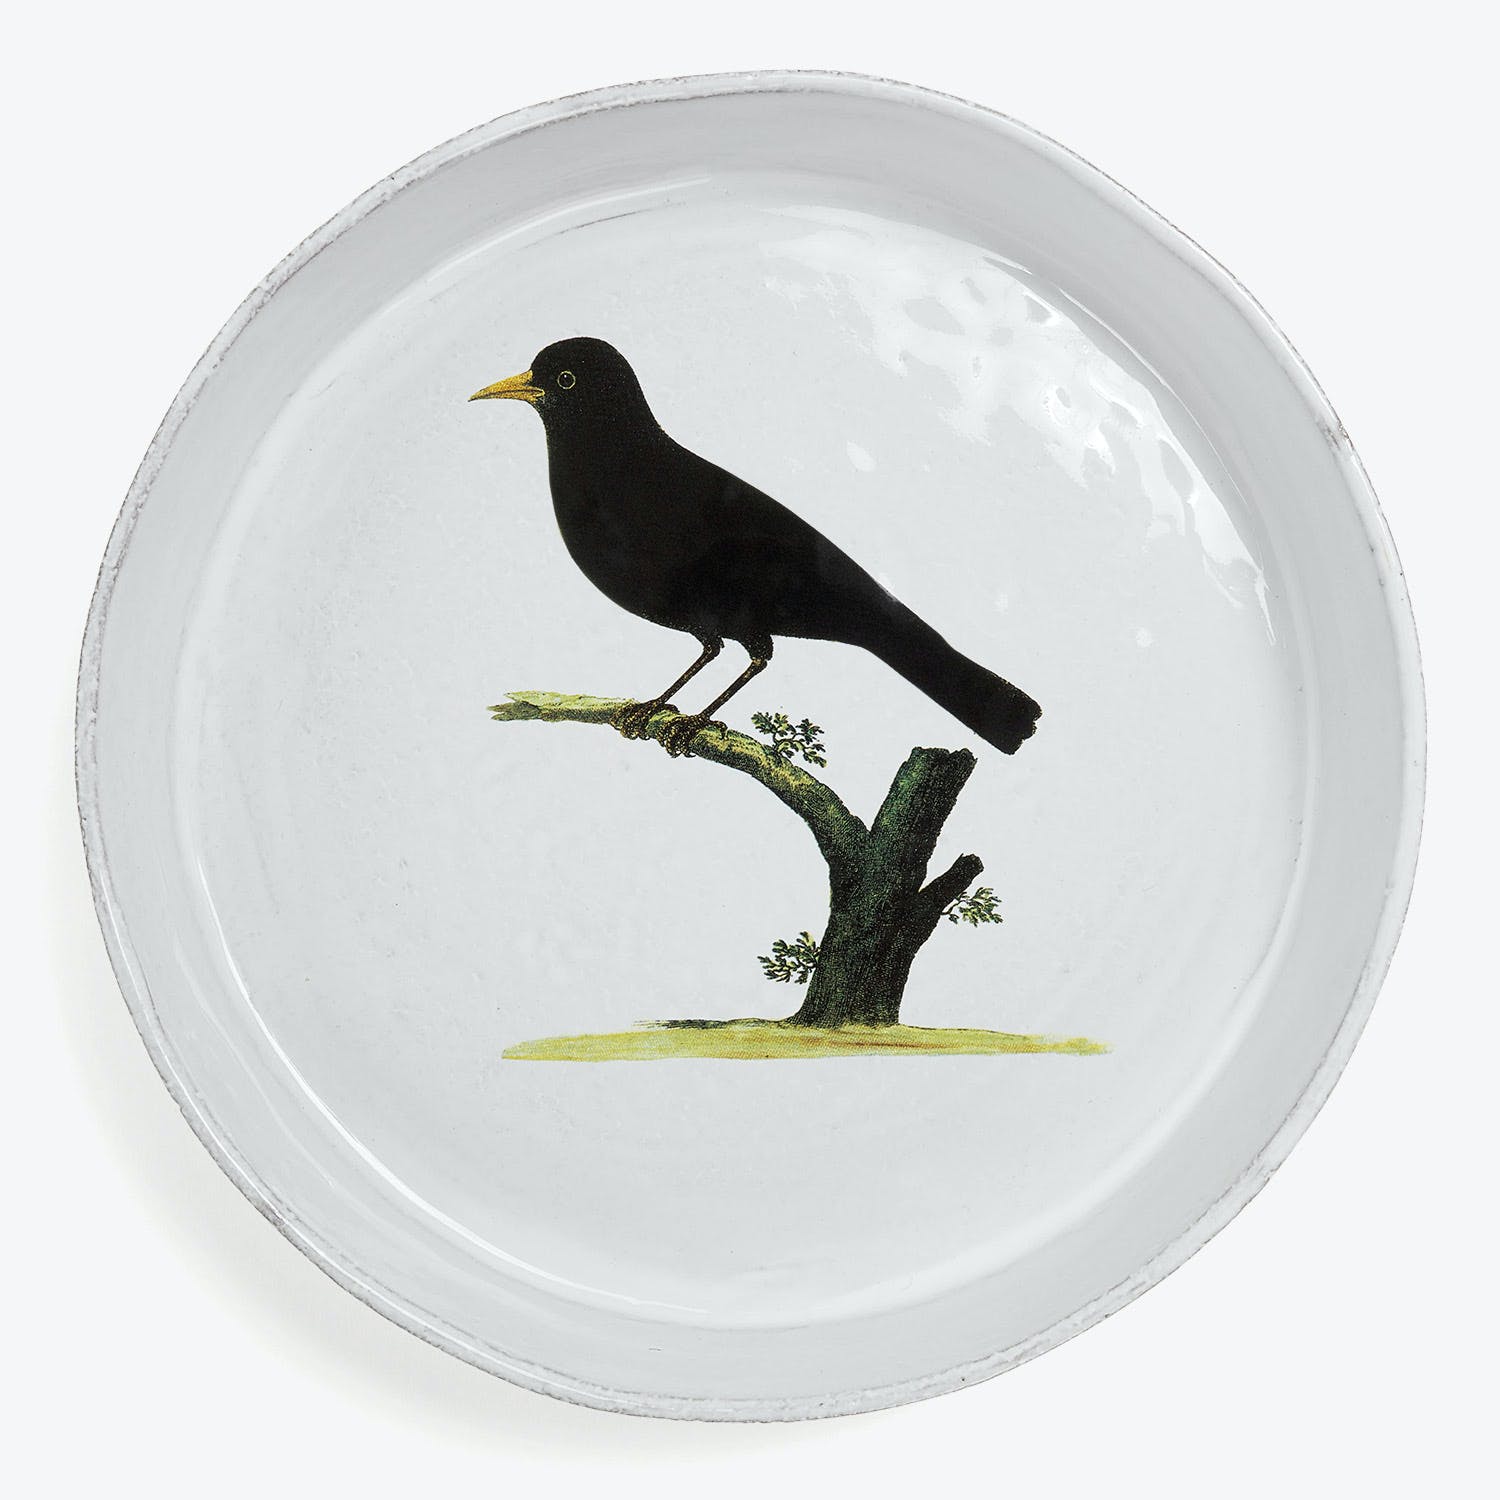 Handmade plate with minimalist design of a black bird perched on a tree branch.